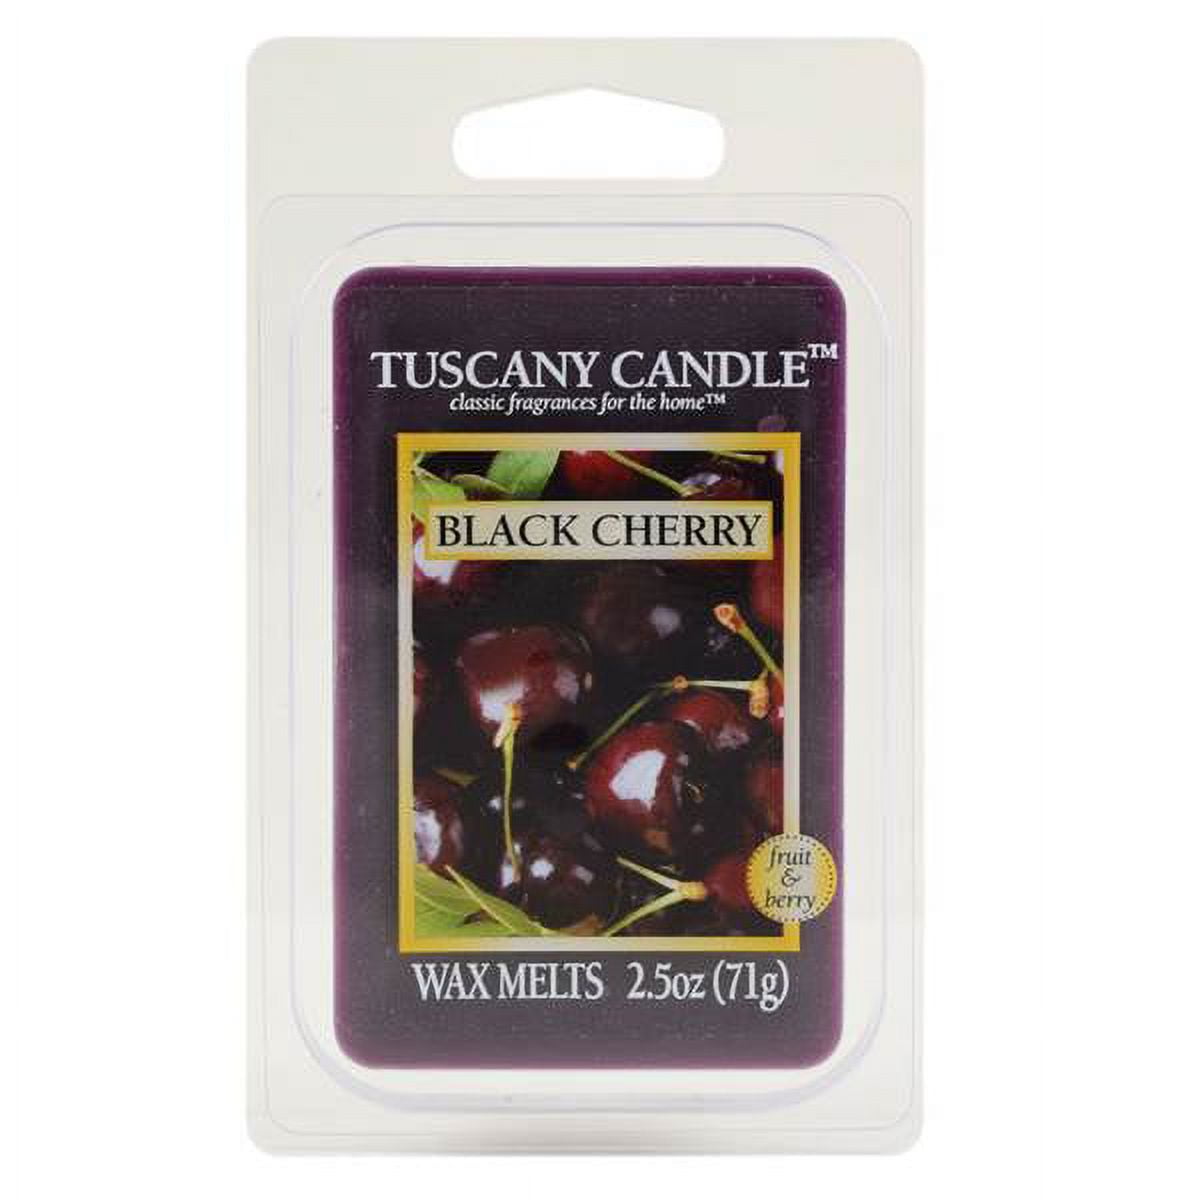 Tuscany Candle Black Cherry Wax Melts 2 Pack